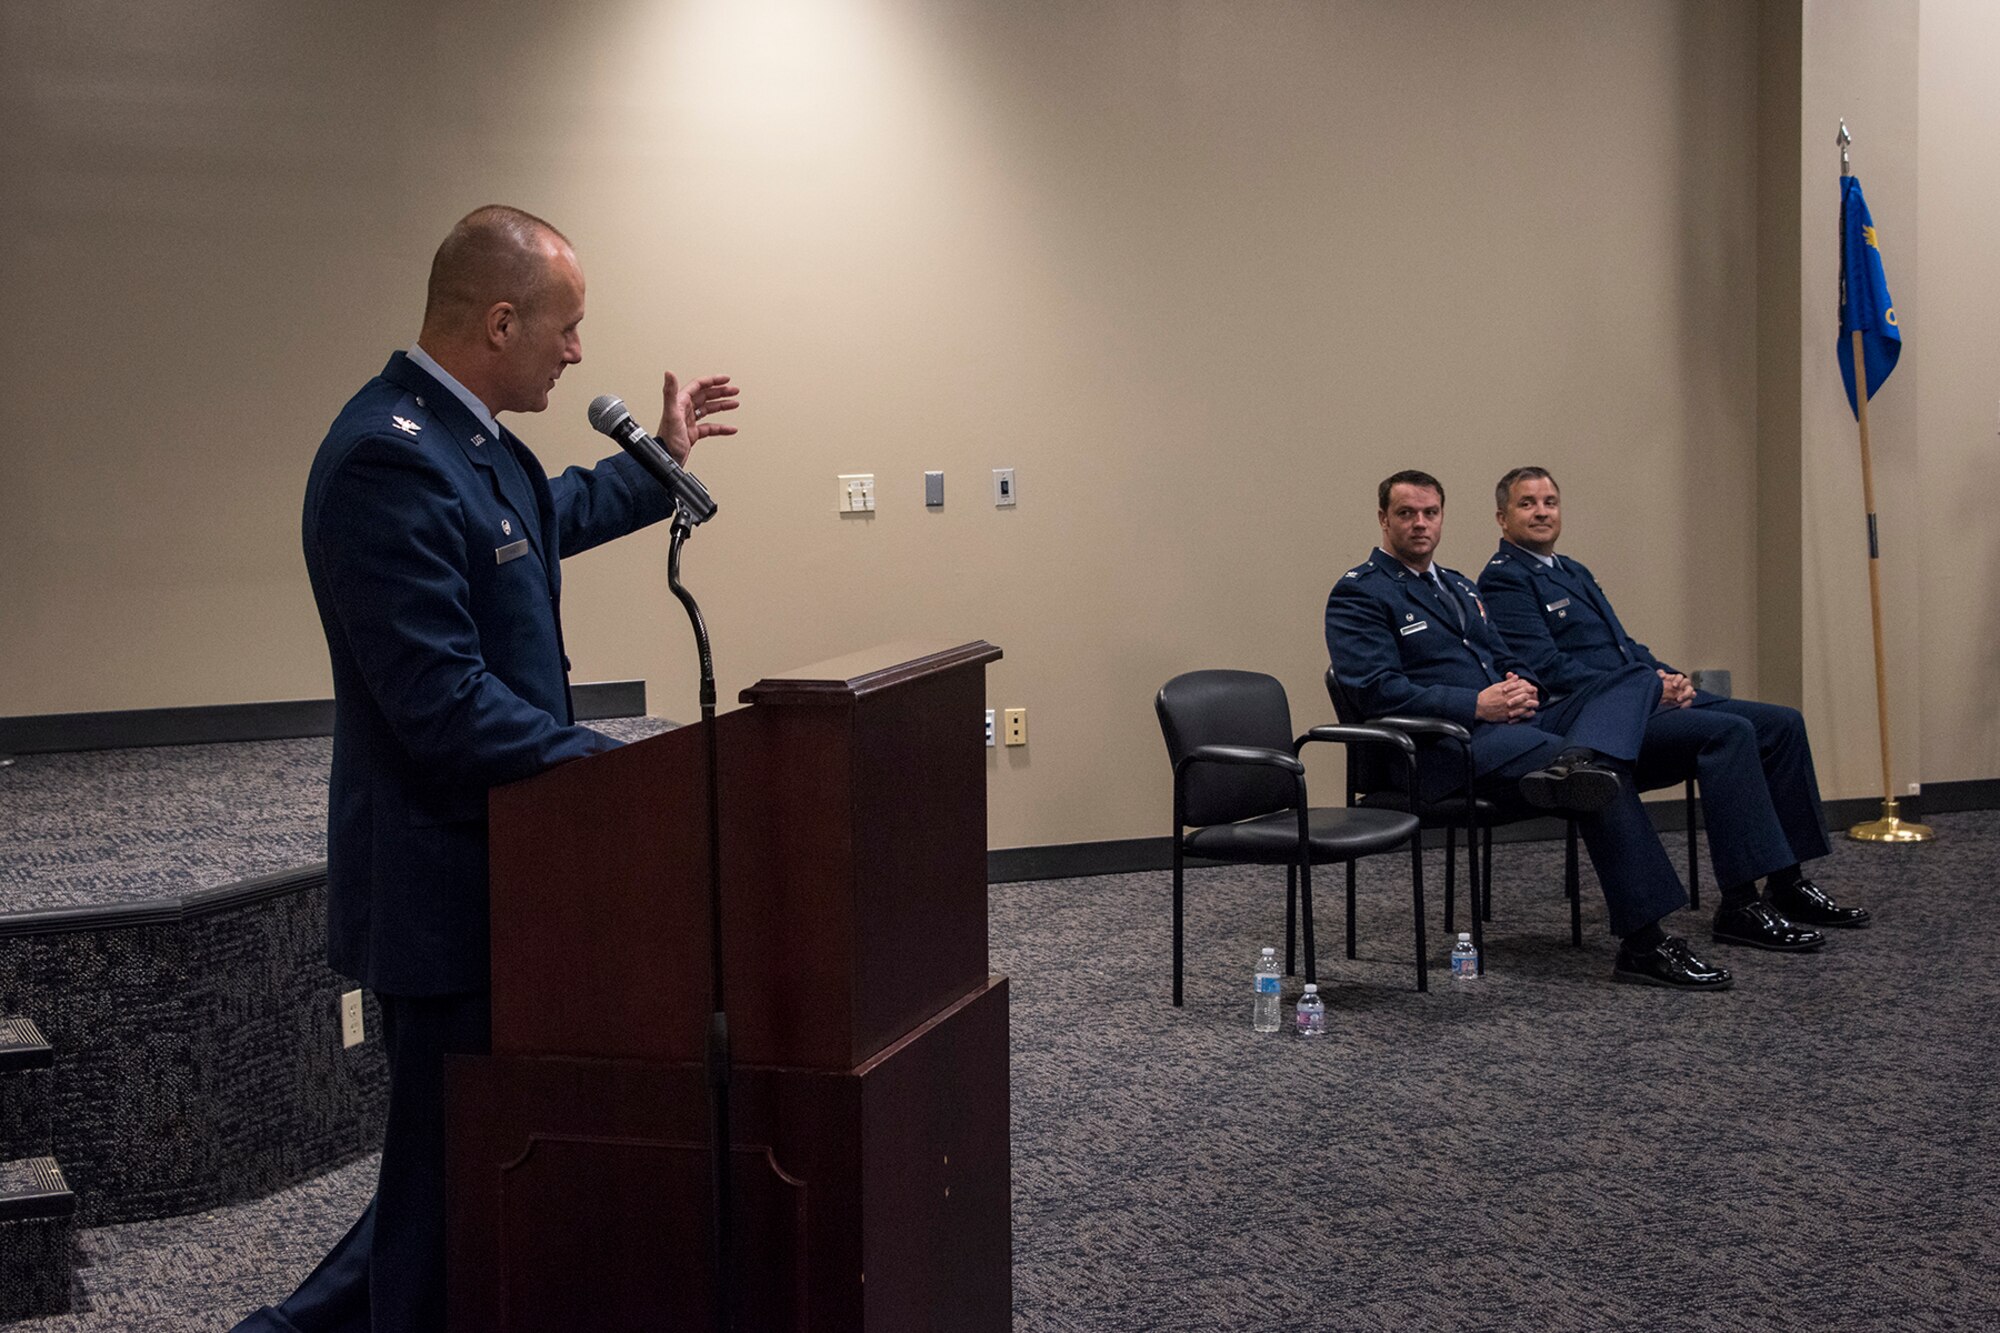 Col. Robert I. Kinney, 188th Wing commander, delivers remarks during a change of command ceremony August 7, 2019, at Ebbing Air National Guard Base, Ft. Smith, Arkansas. Col. Patric D. Coggin assumed command of the 188th Operations Group from Col. Jeremiah S. Gentry, who will be promoted to the position of wing vice commander during the wing’s August 2019 unit training assembly. (U.S. Air National Guard photo by Tech. Sgt. John E. Hillier)